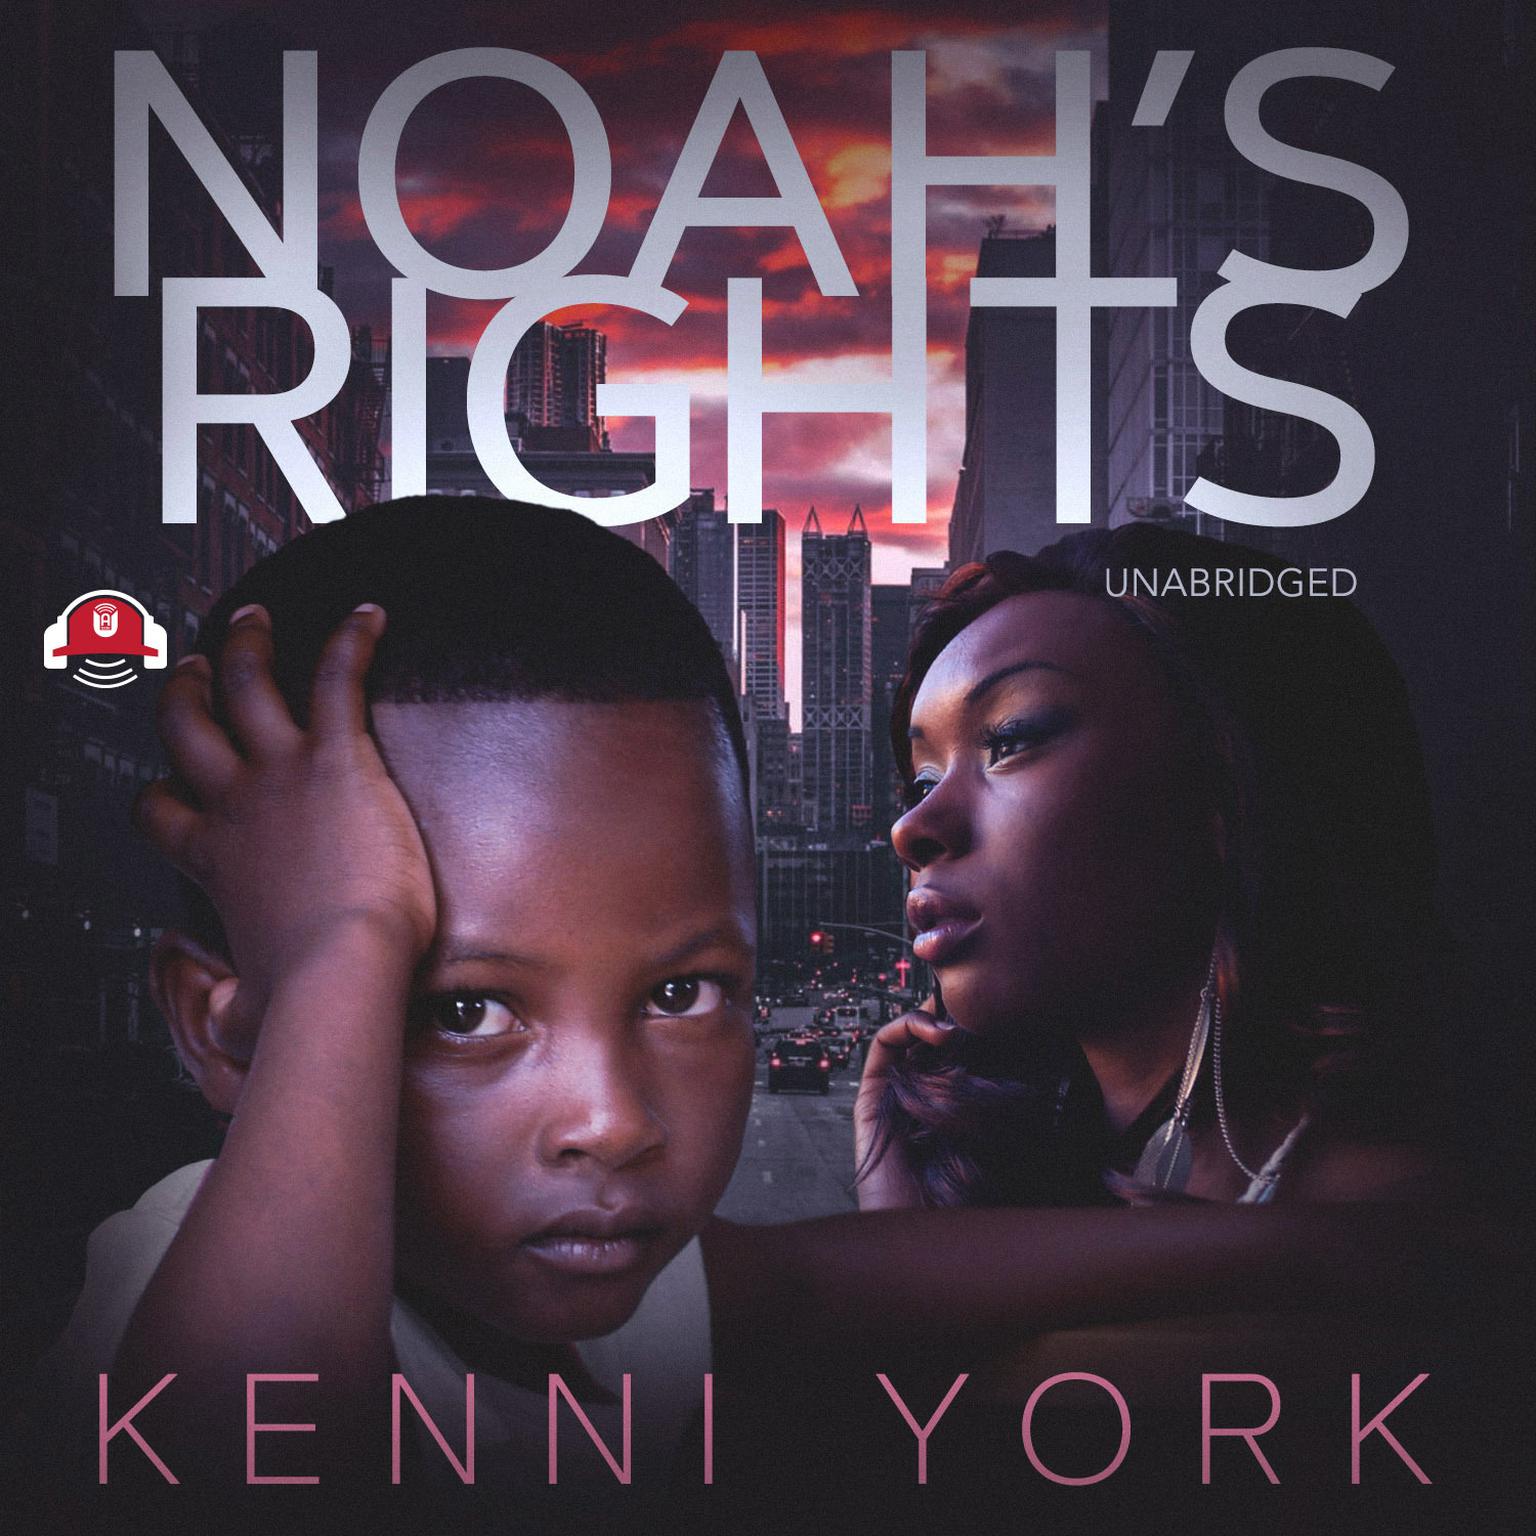 Noah’s Rights Audiobook, by Kenni York